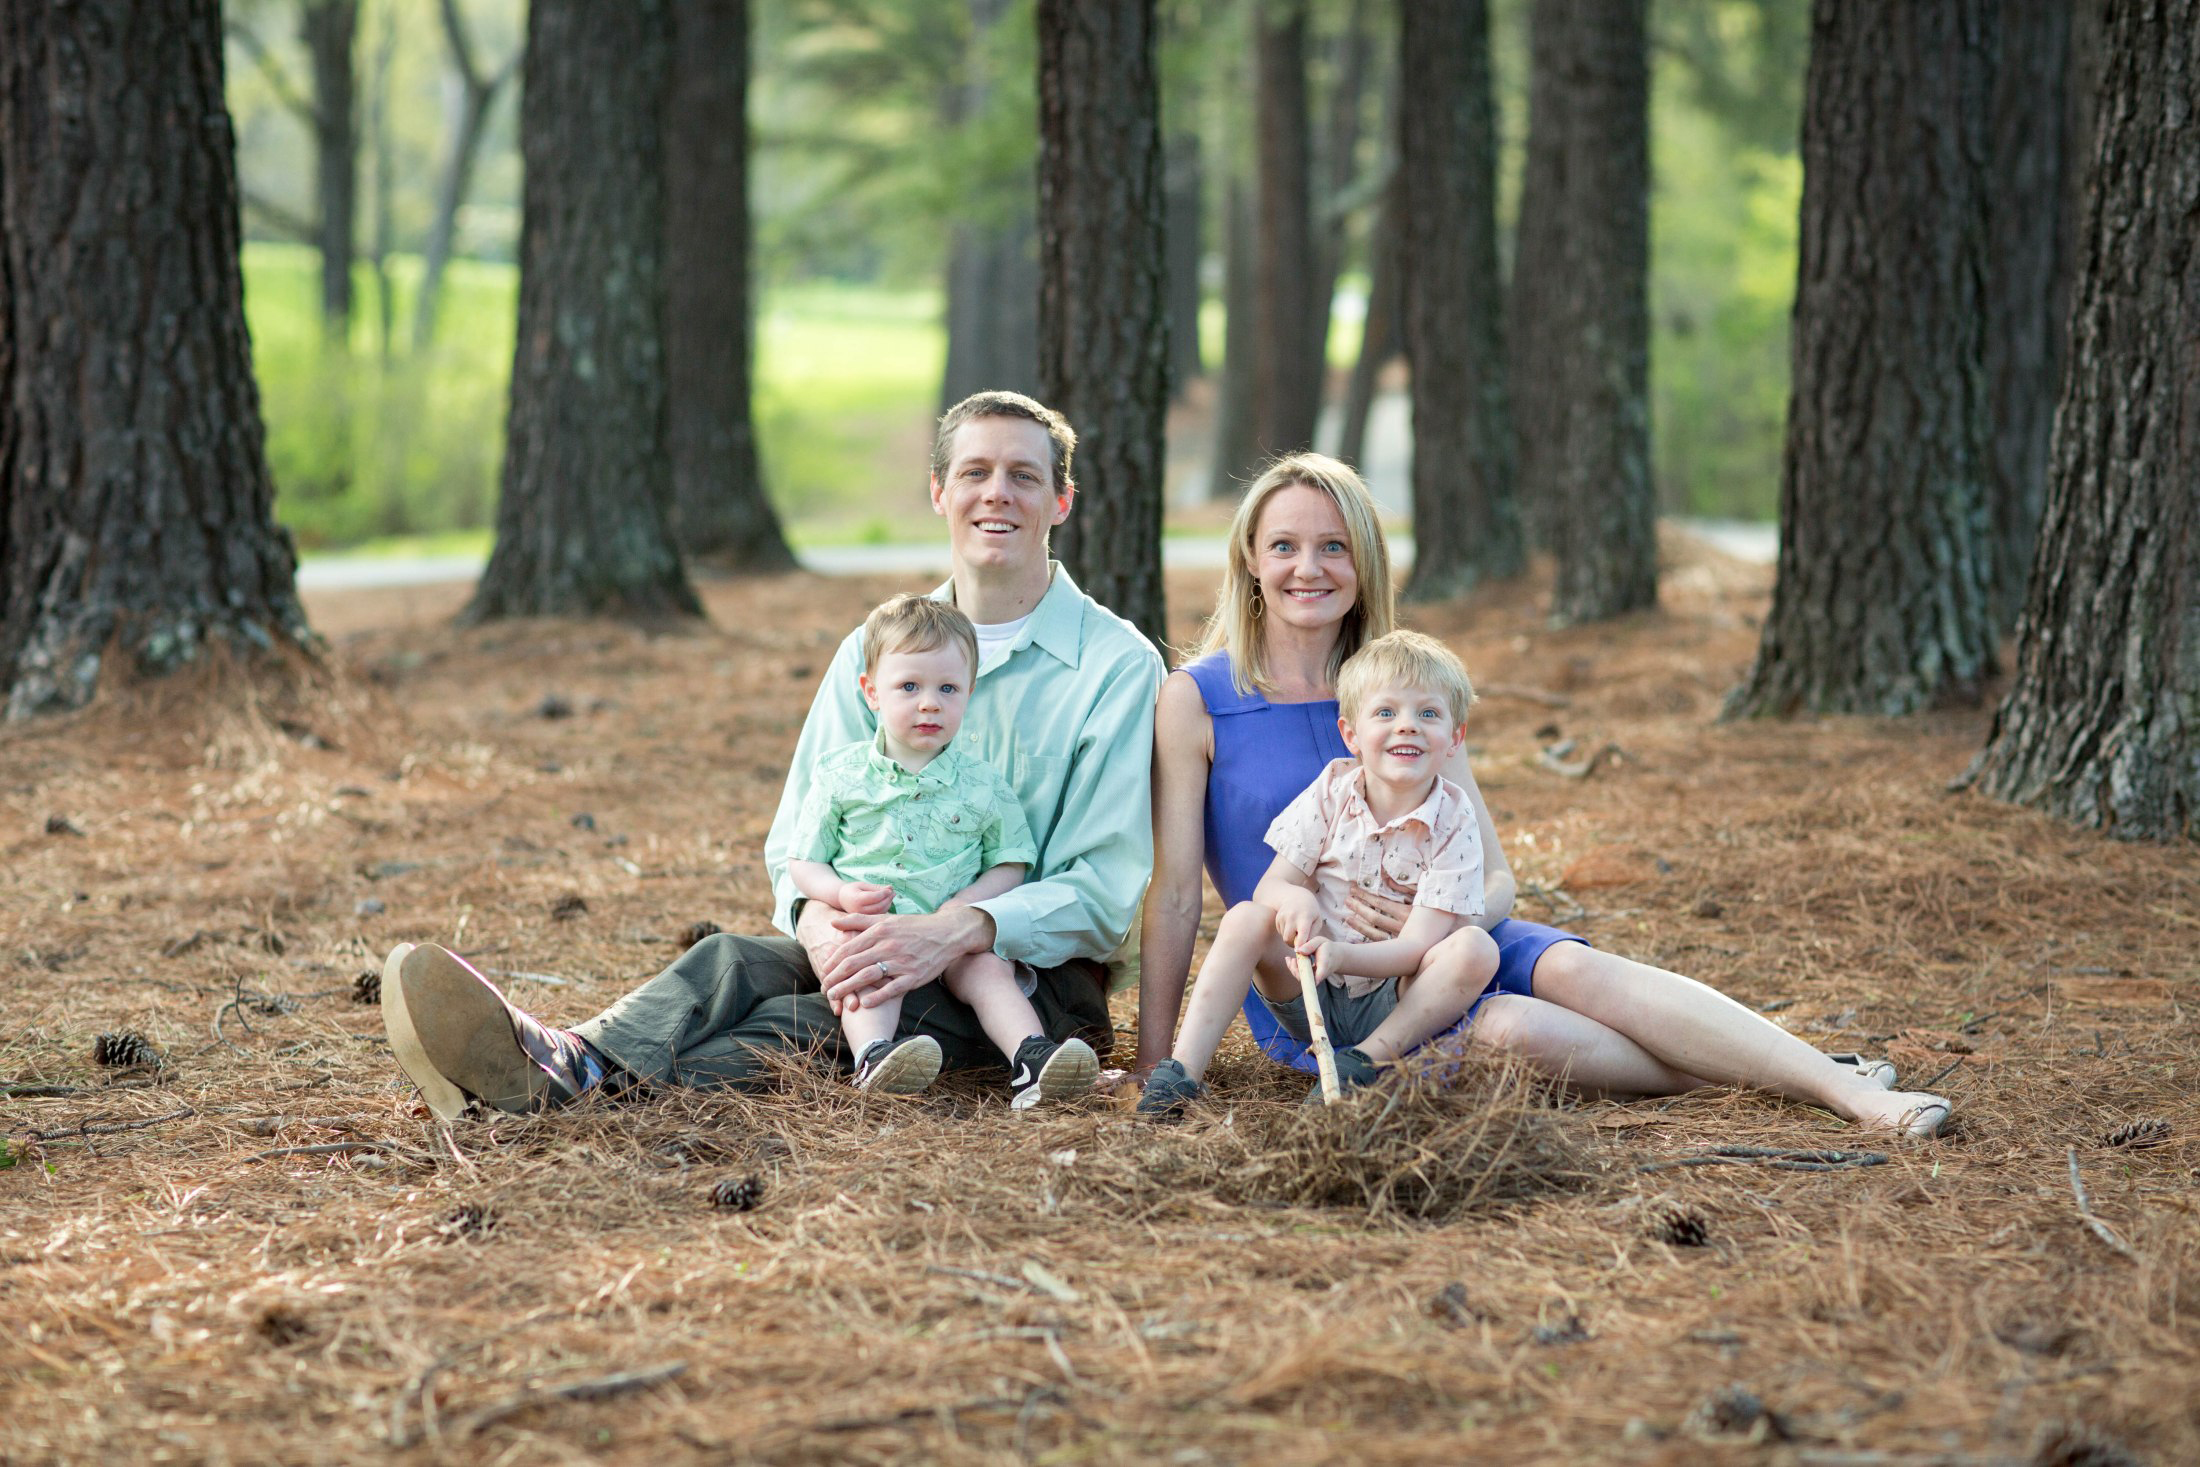 Dr. Kelleher and her family sit in pine needles